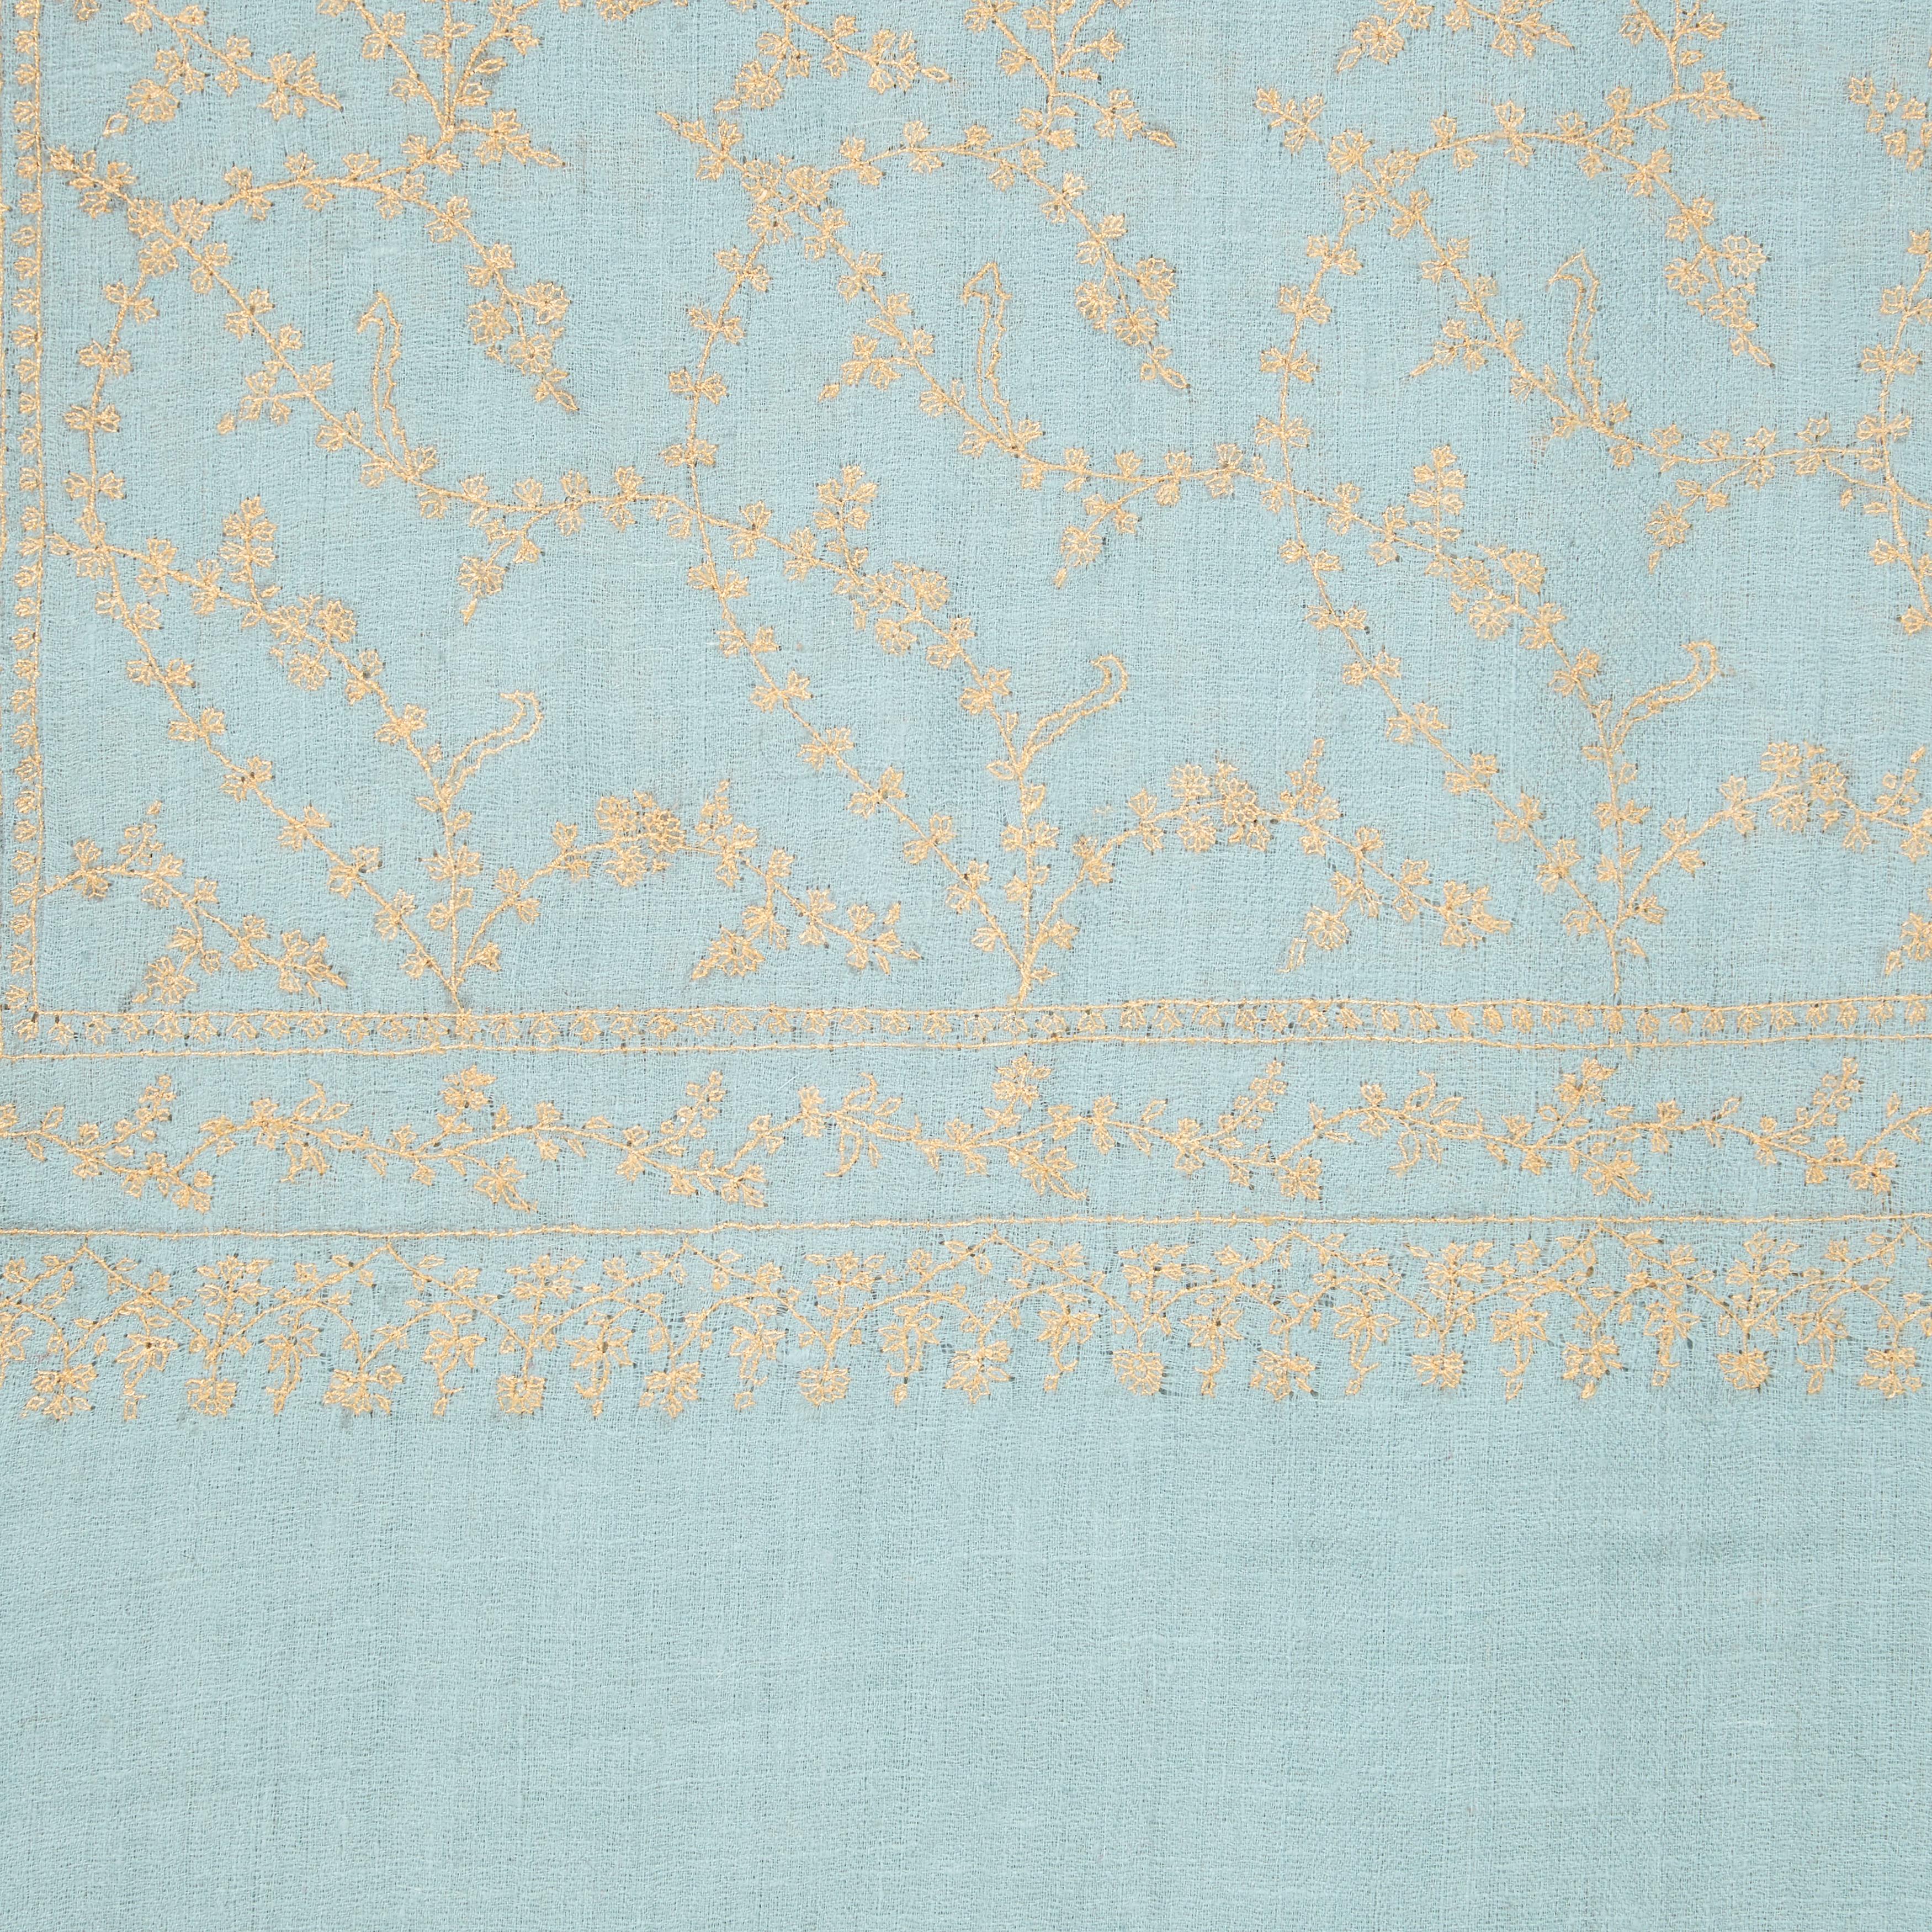 Gray Hand Embroidered 100% Cashmere Shawl in Pale Blue & Gold Made in Kashmir - Gift